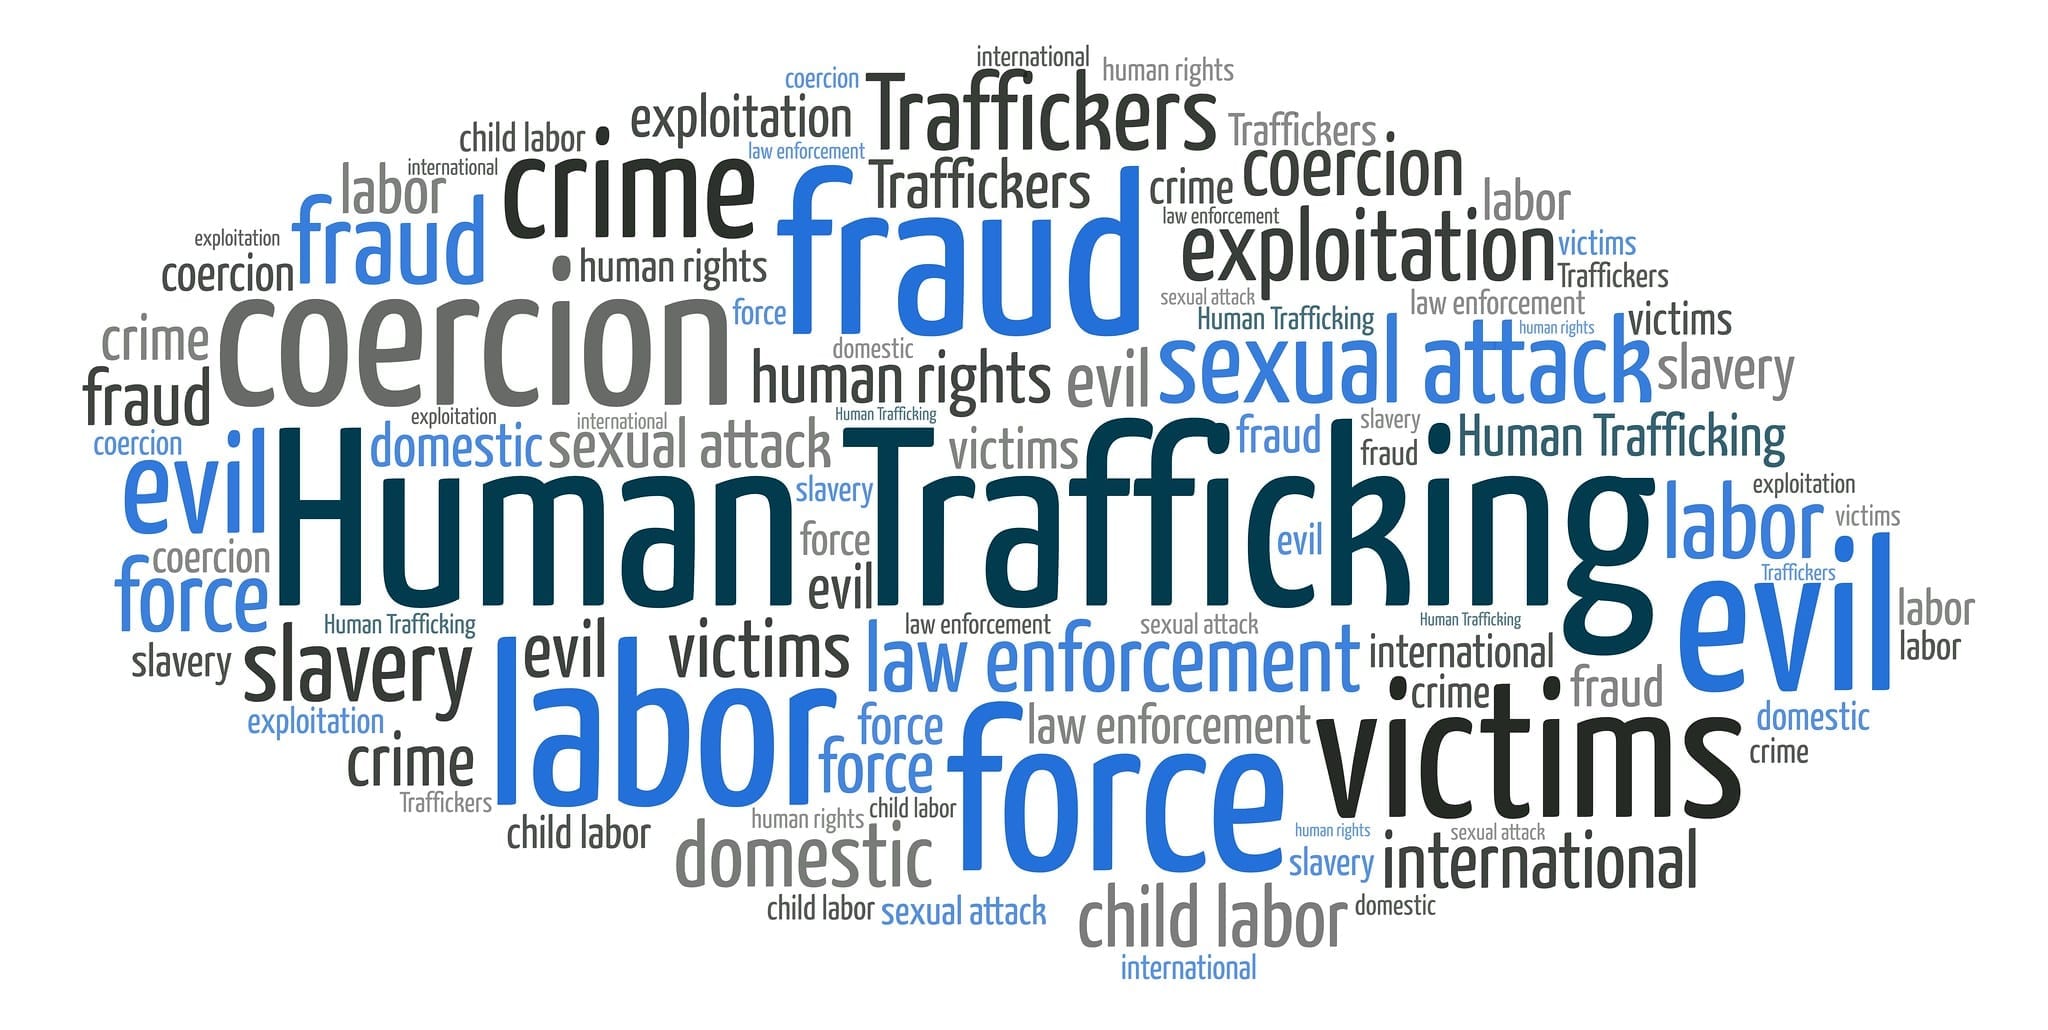 Slavery and Trafficking Occurs in 90 per cent of Recent Wars and Conflicts